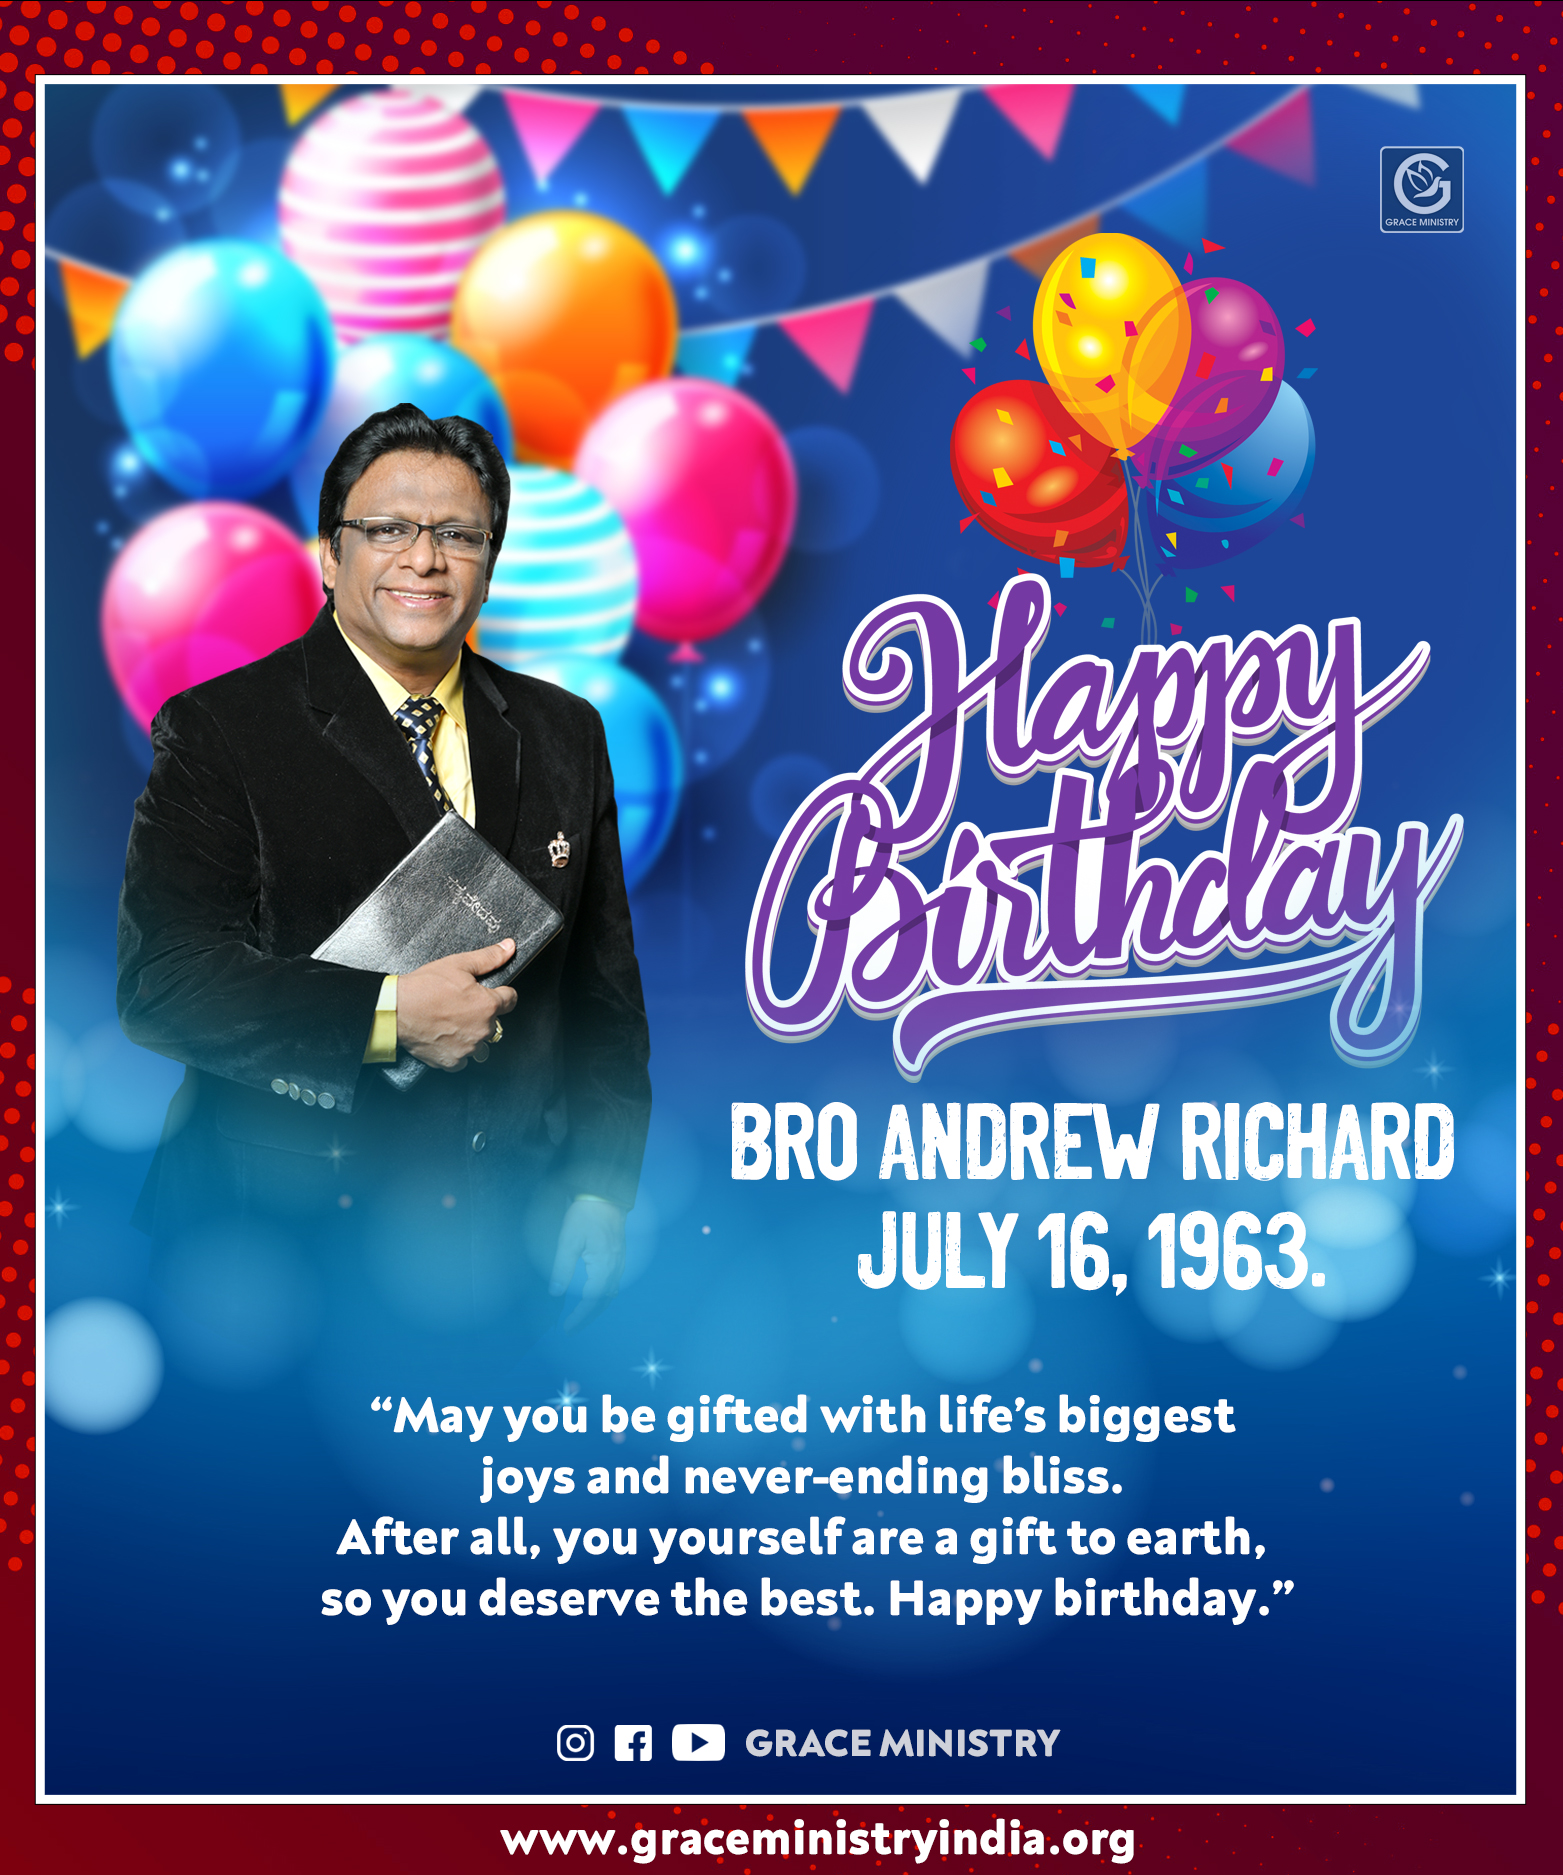 Prophetic Preacher Bro Andrew Richard turns 58 on Thursday, 2020, with a myriad of wishes from family members, other Christian leaders, and devotees. Happy Birthday Bro Andrew Richard.